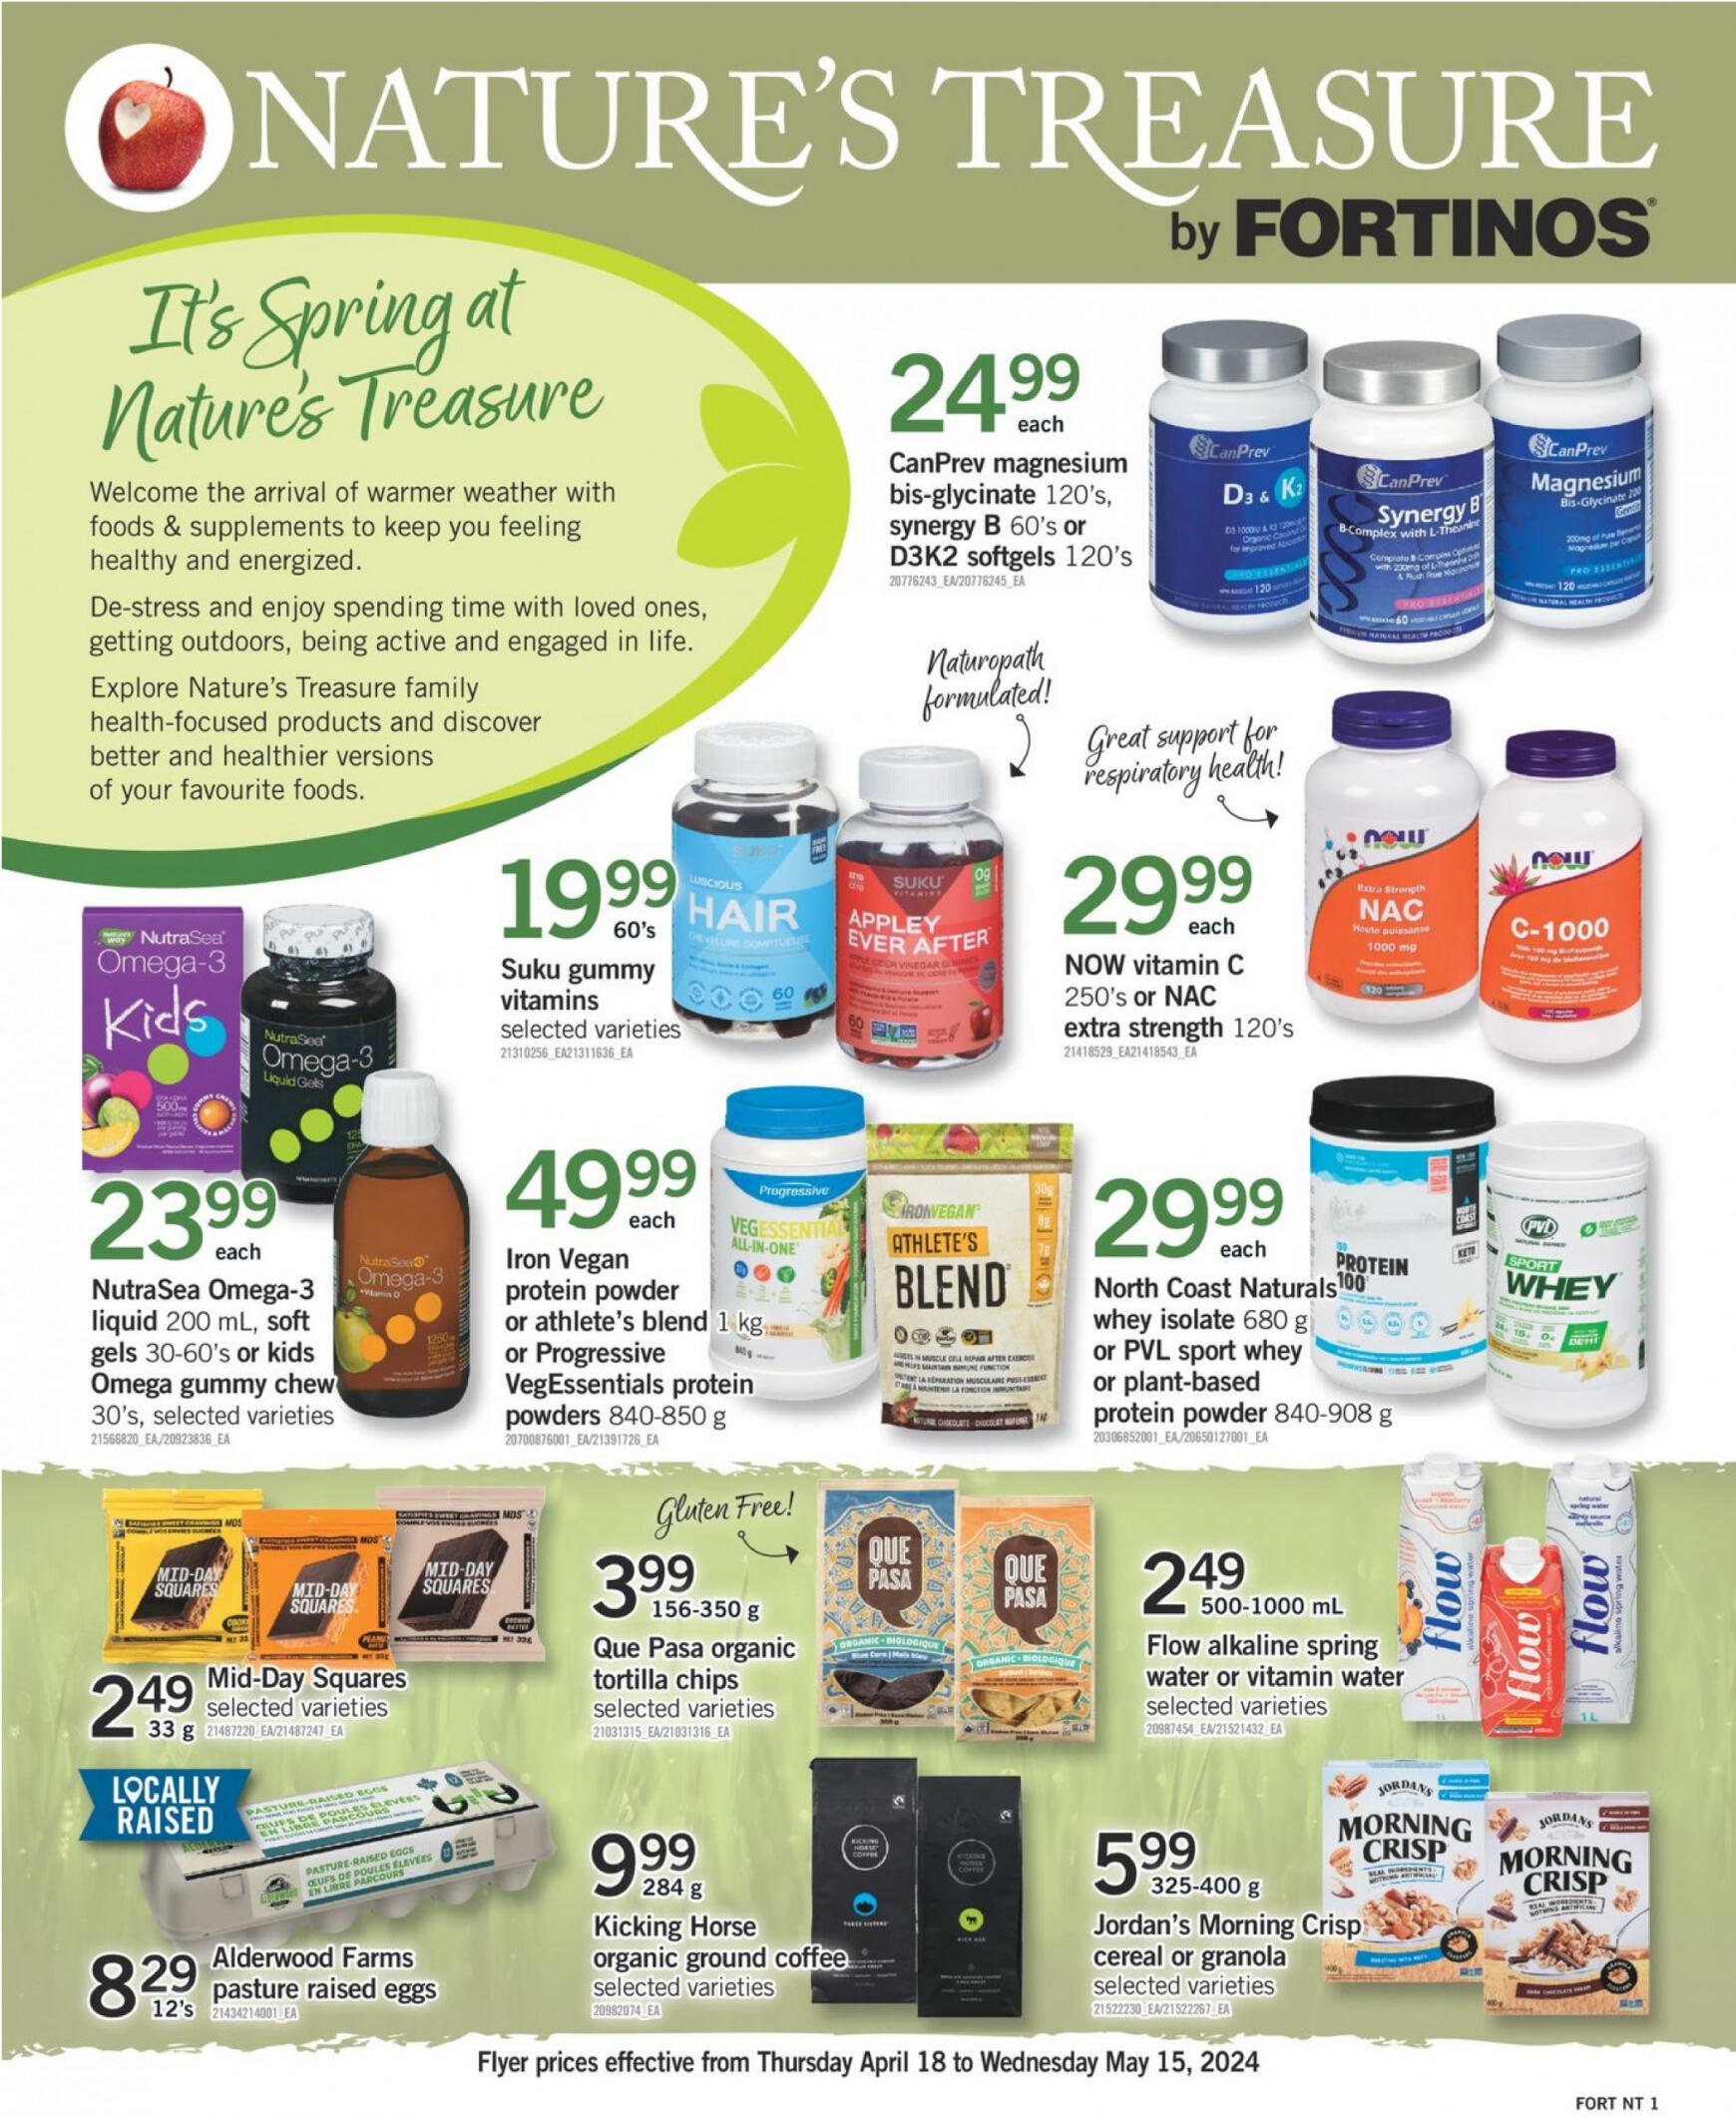 fortinos - Fortinos flyer current 09.05. - 15.05. - page: 9